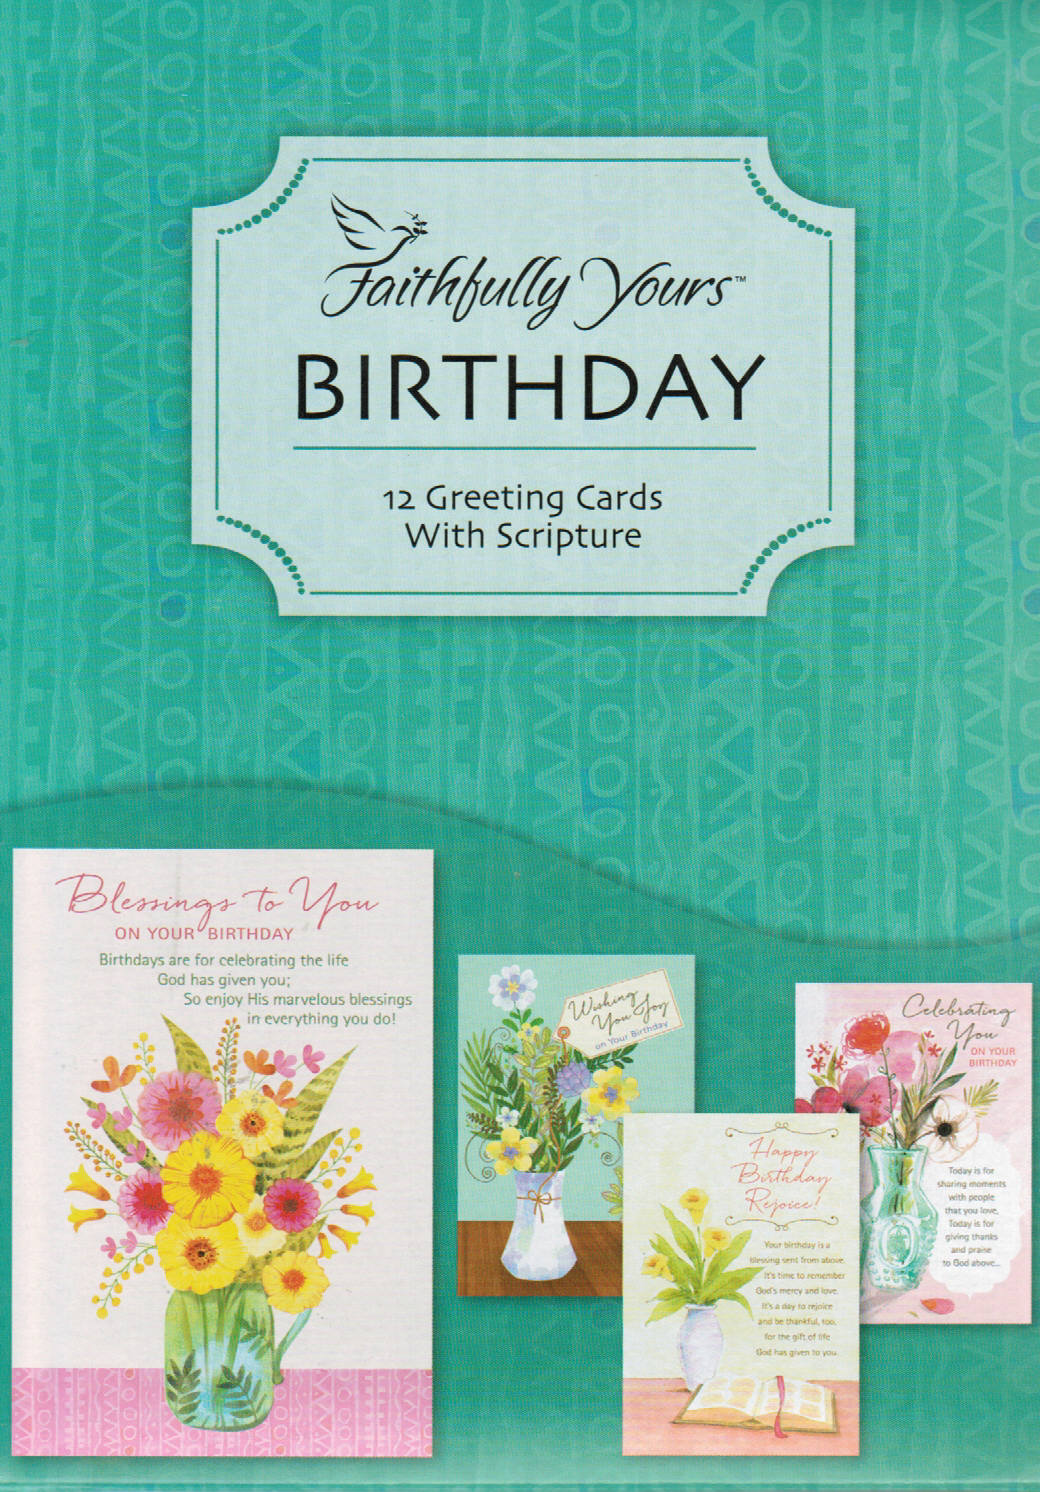 Faithfully Yours Greeting Cards - Birthday: Bless Your Day